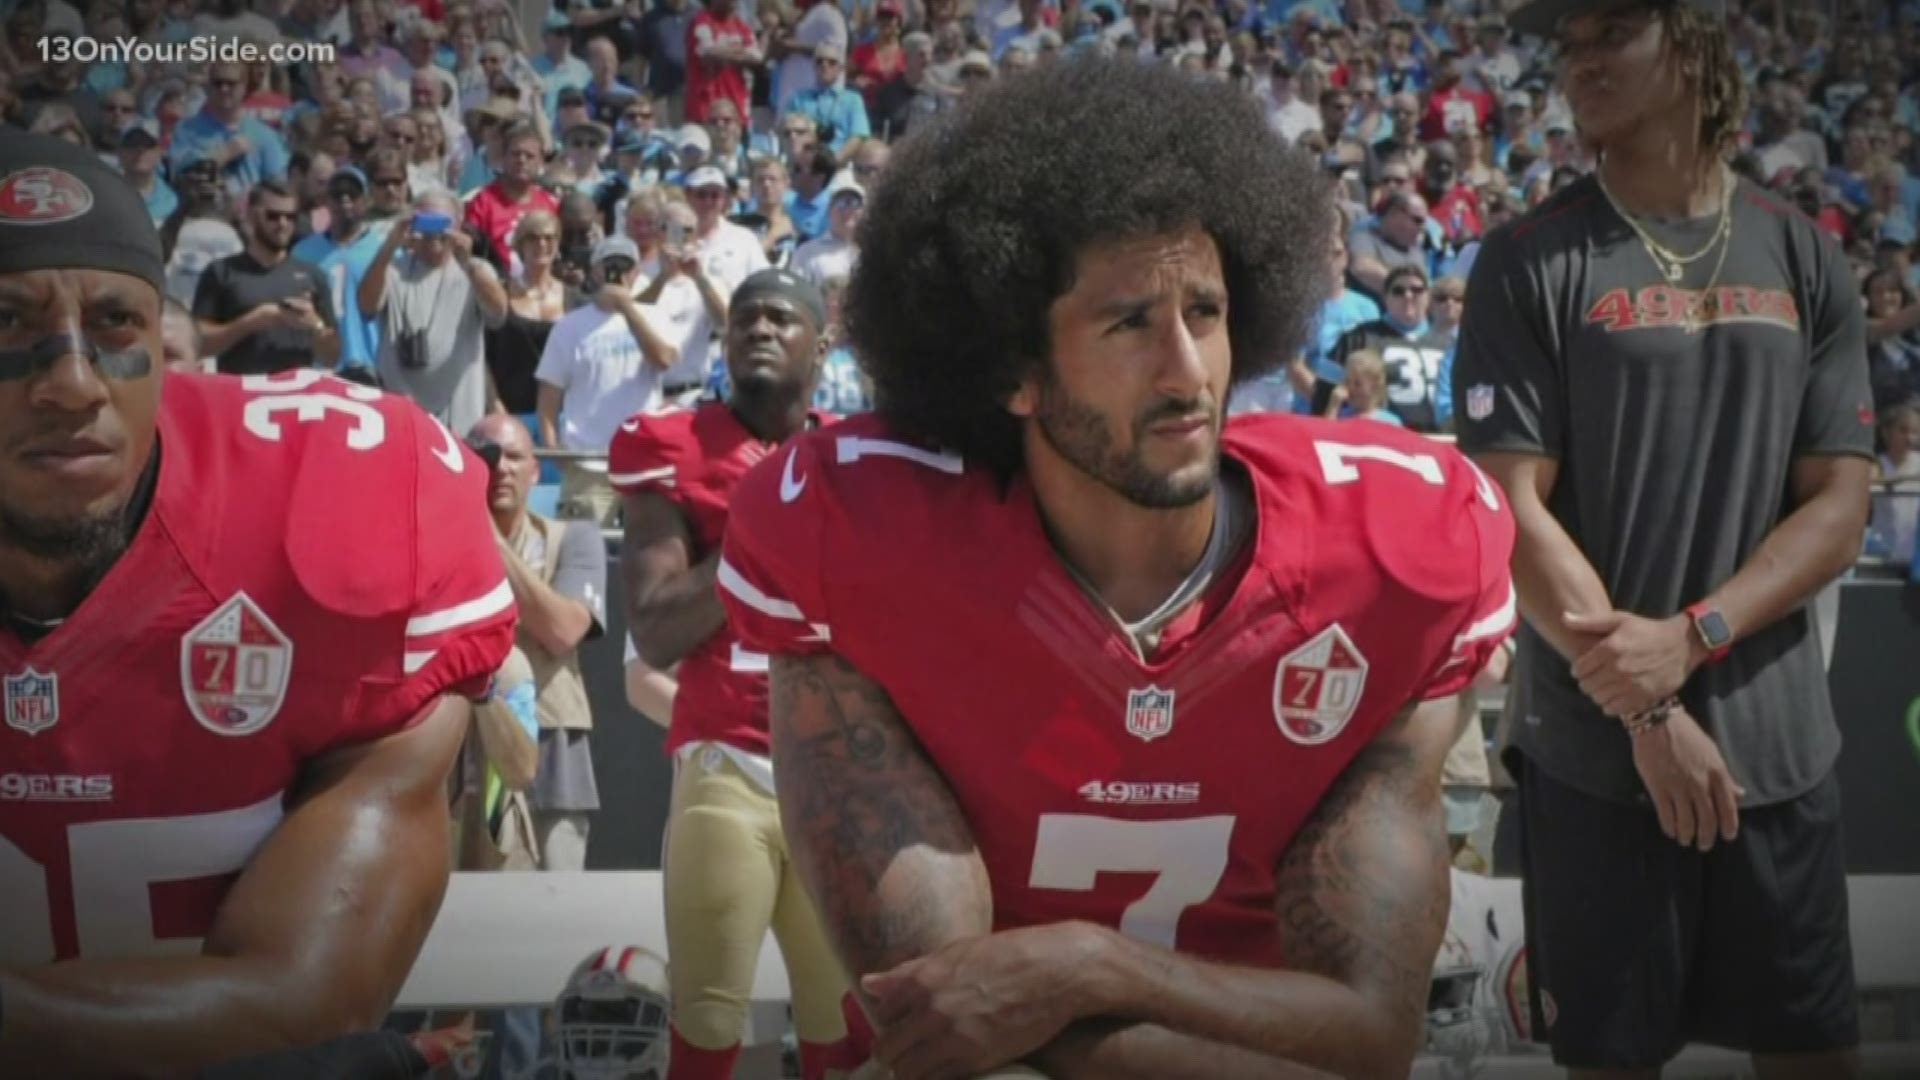 Colin Kaepernick plans to audition for NFL teams on Saturday in a private workout arranged by the league to be held in Atlanta.